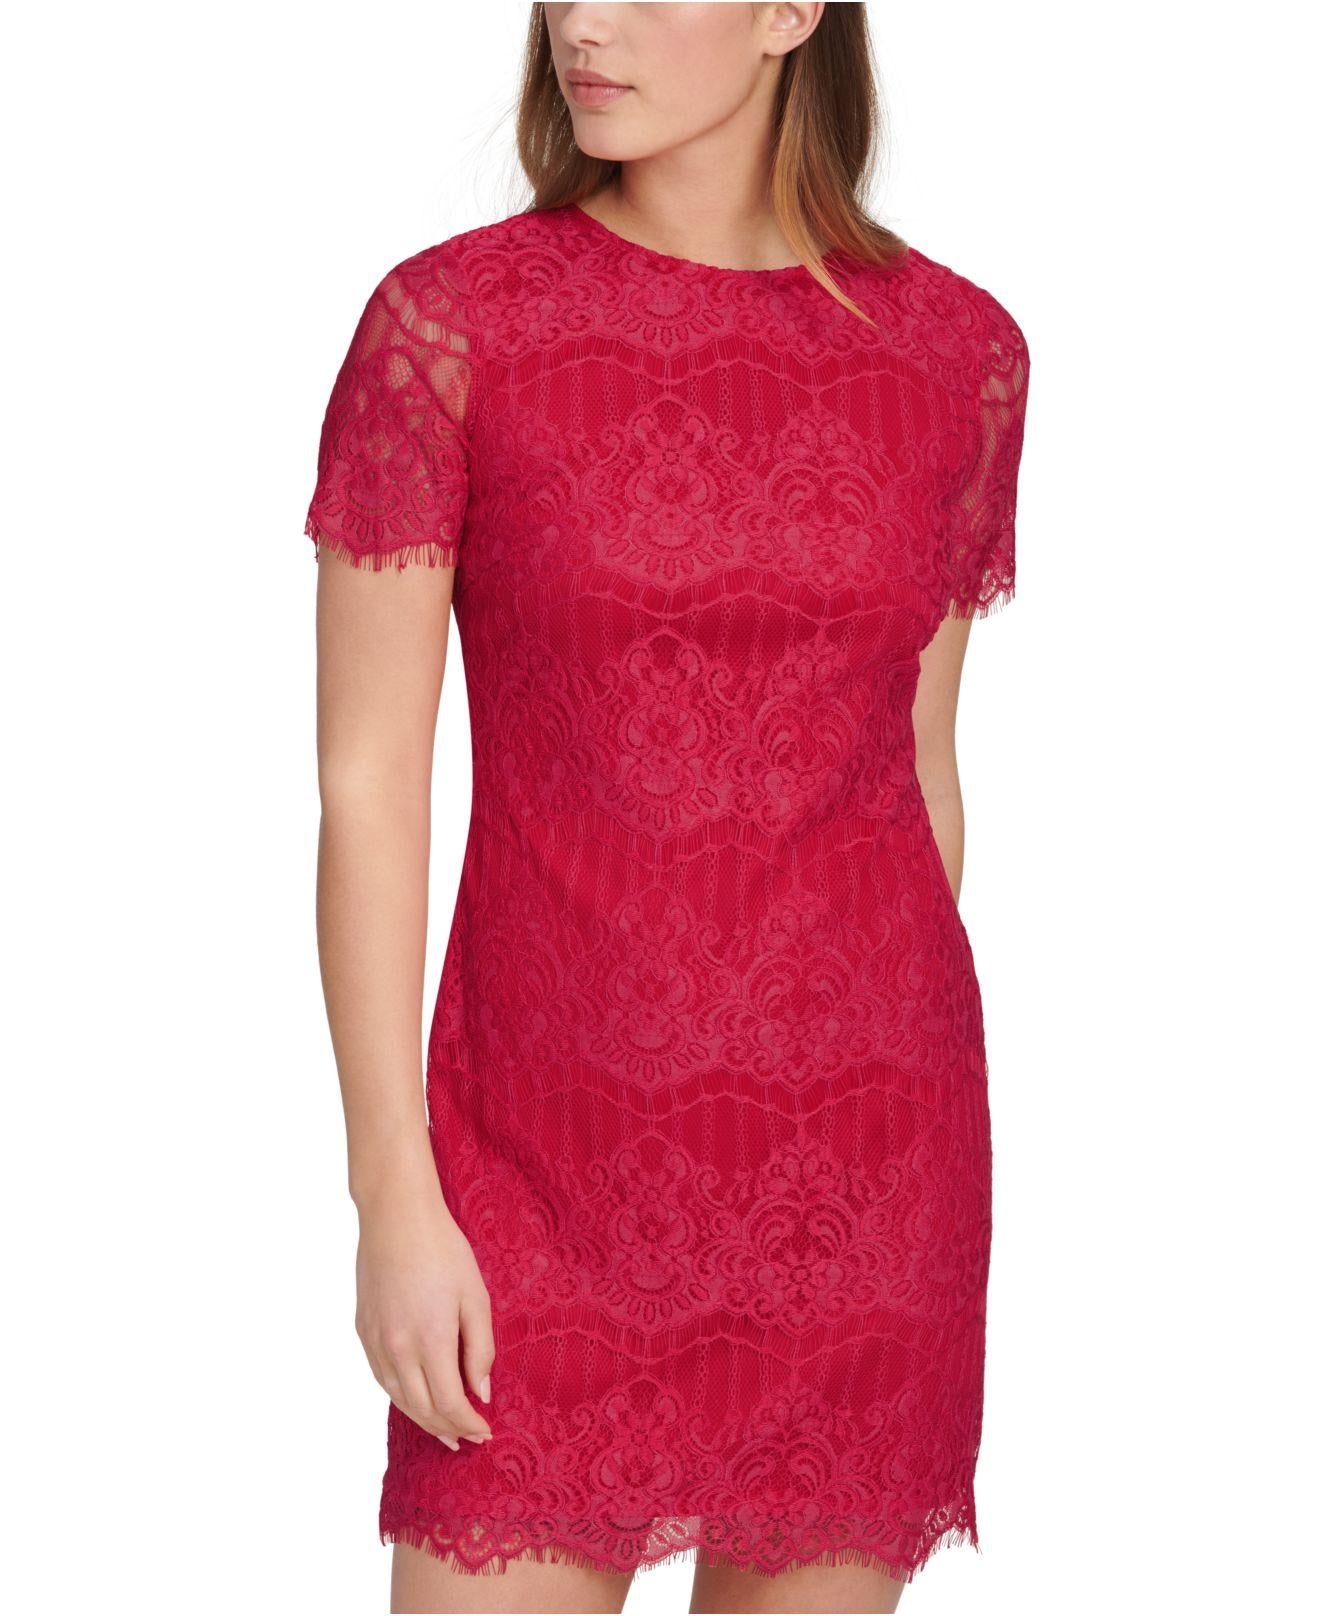 KENSIE DRESSES Womens Pink Stretch Zippered Lace Scalloped Short Sleeve Crew Neck Short Party Sheath Dress 2